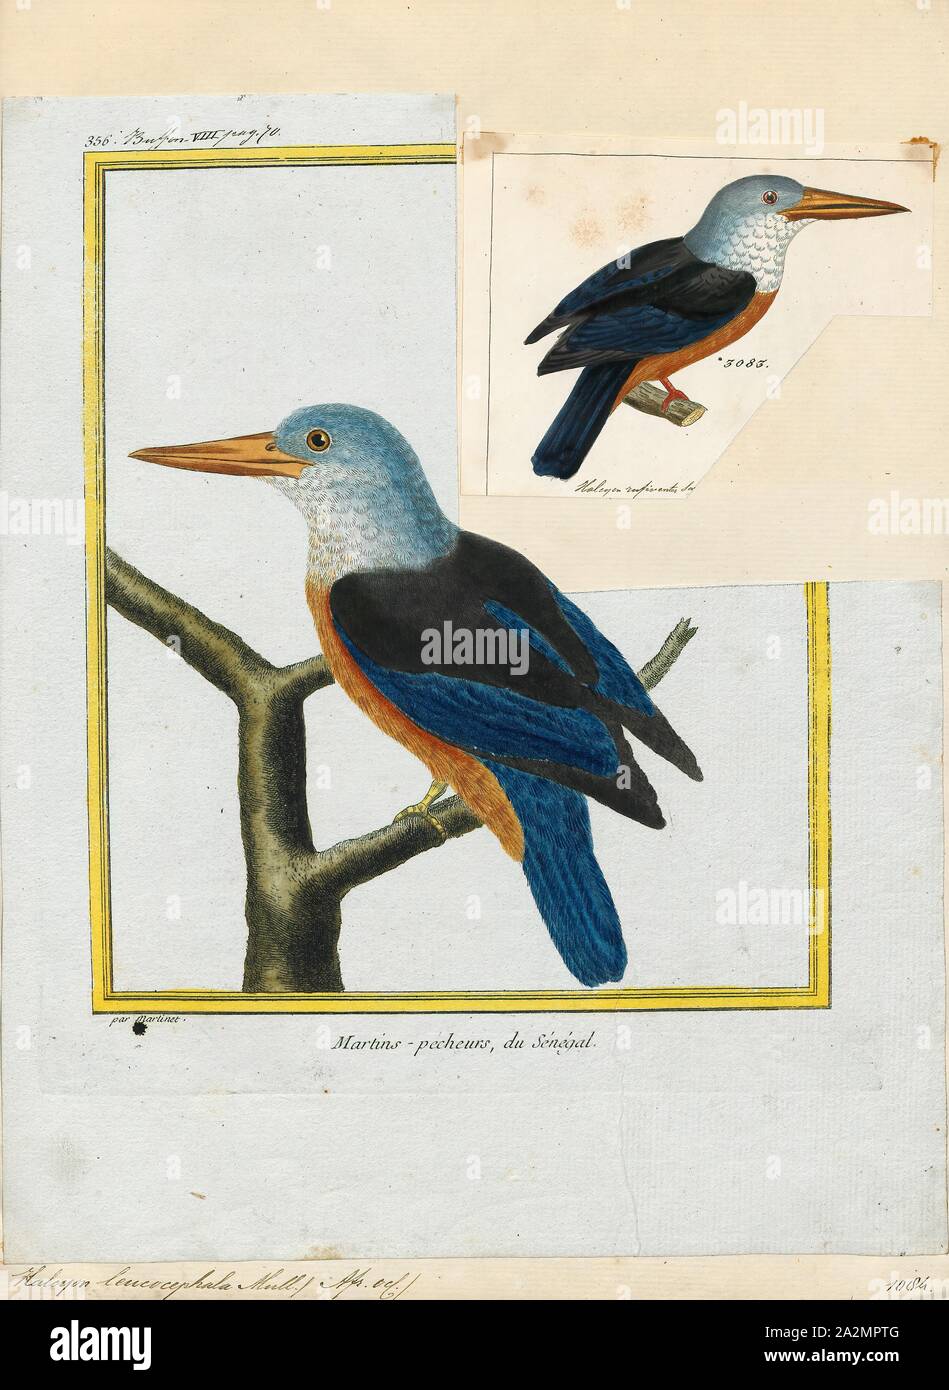 Halcyon leucocephala, Print, The grey-headed kingfisher (Halcyon leucocephala) has a wide distribution from the Cape Verde Islands off the north-west coast of Africa to Mauritania, Senegal and Gambia, east to Ethiopia, Somalia and southern Arabia and south to South Africa., 1700-1880 Stock Photo